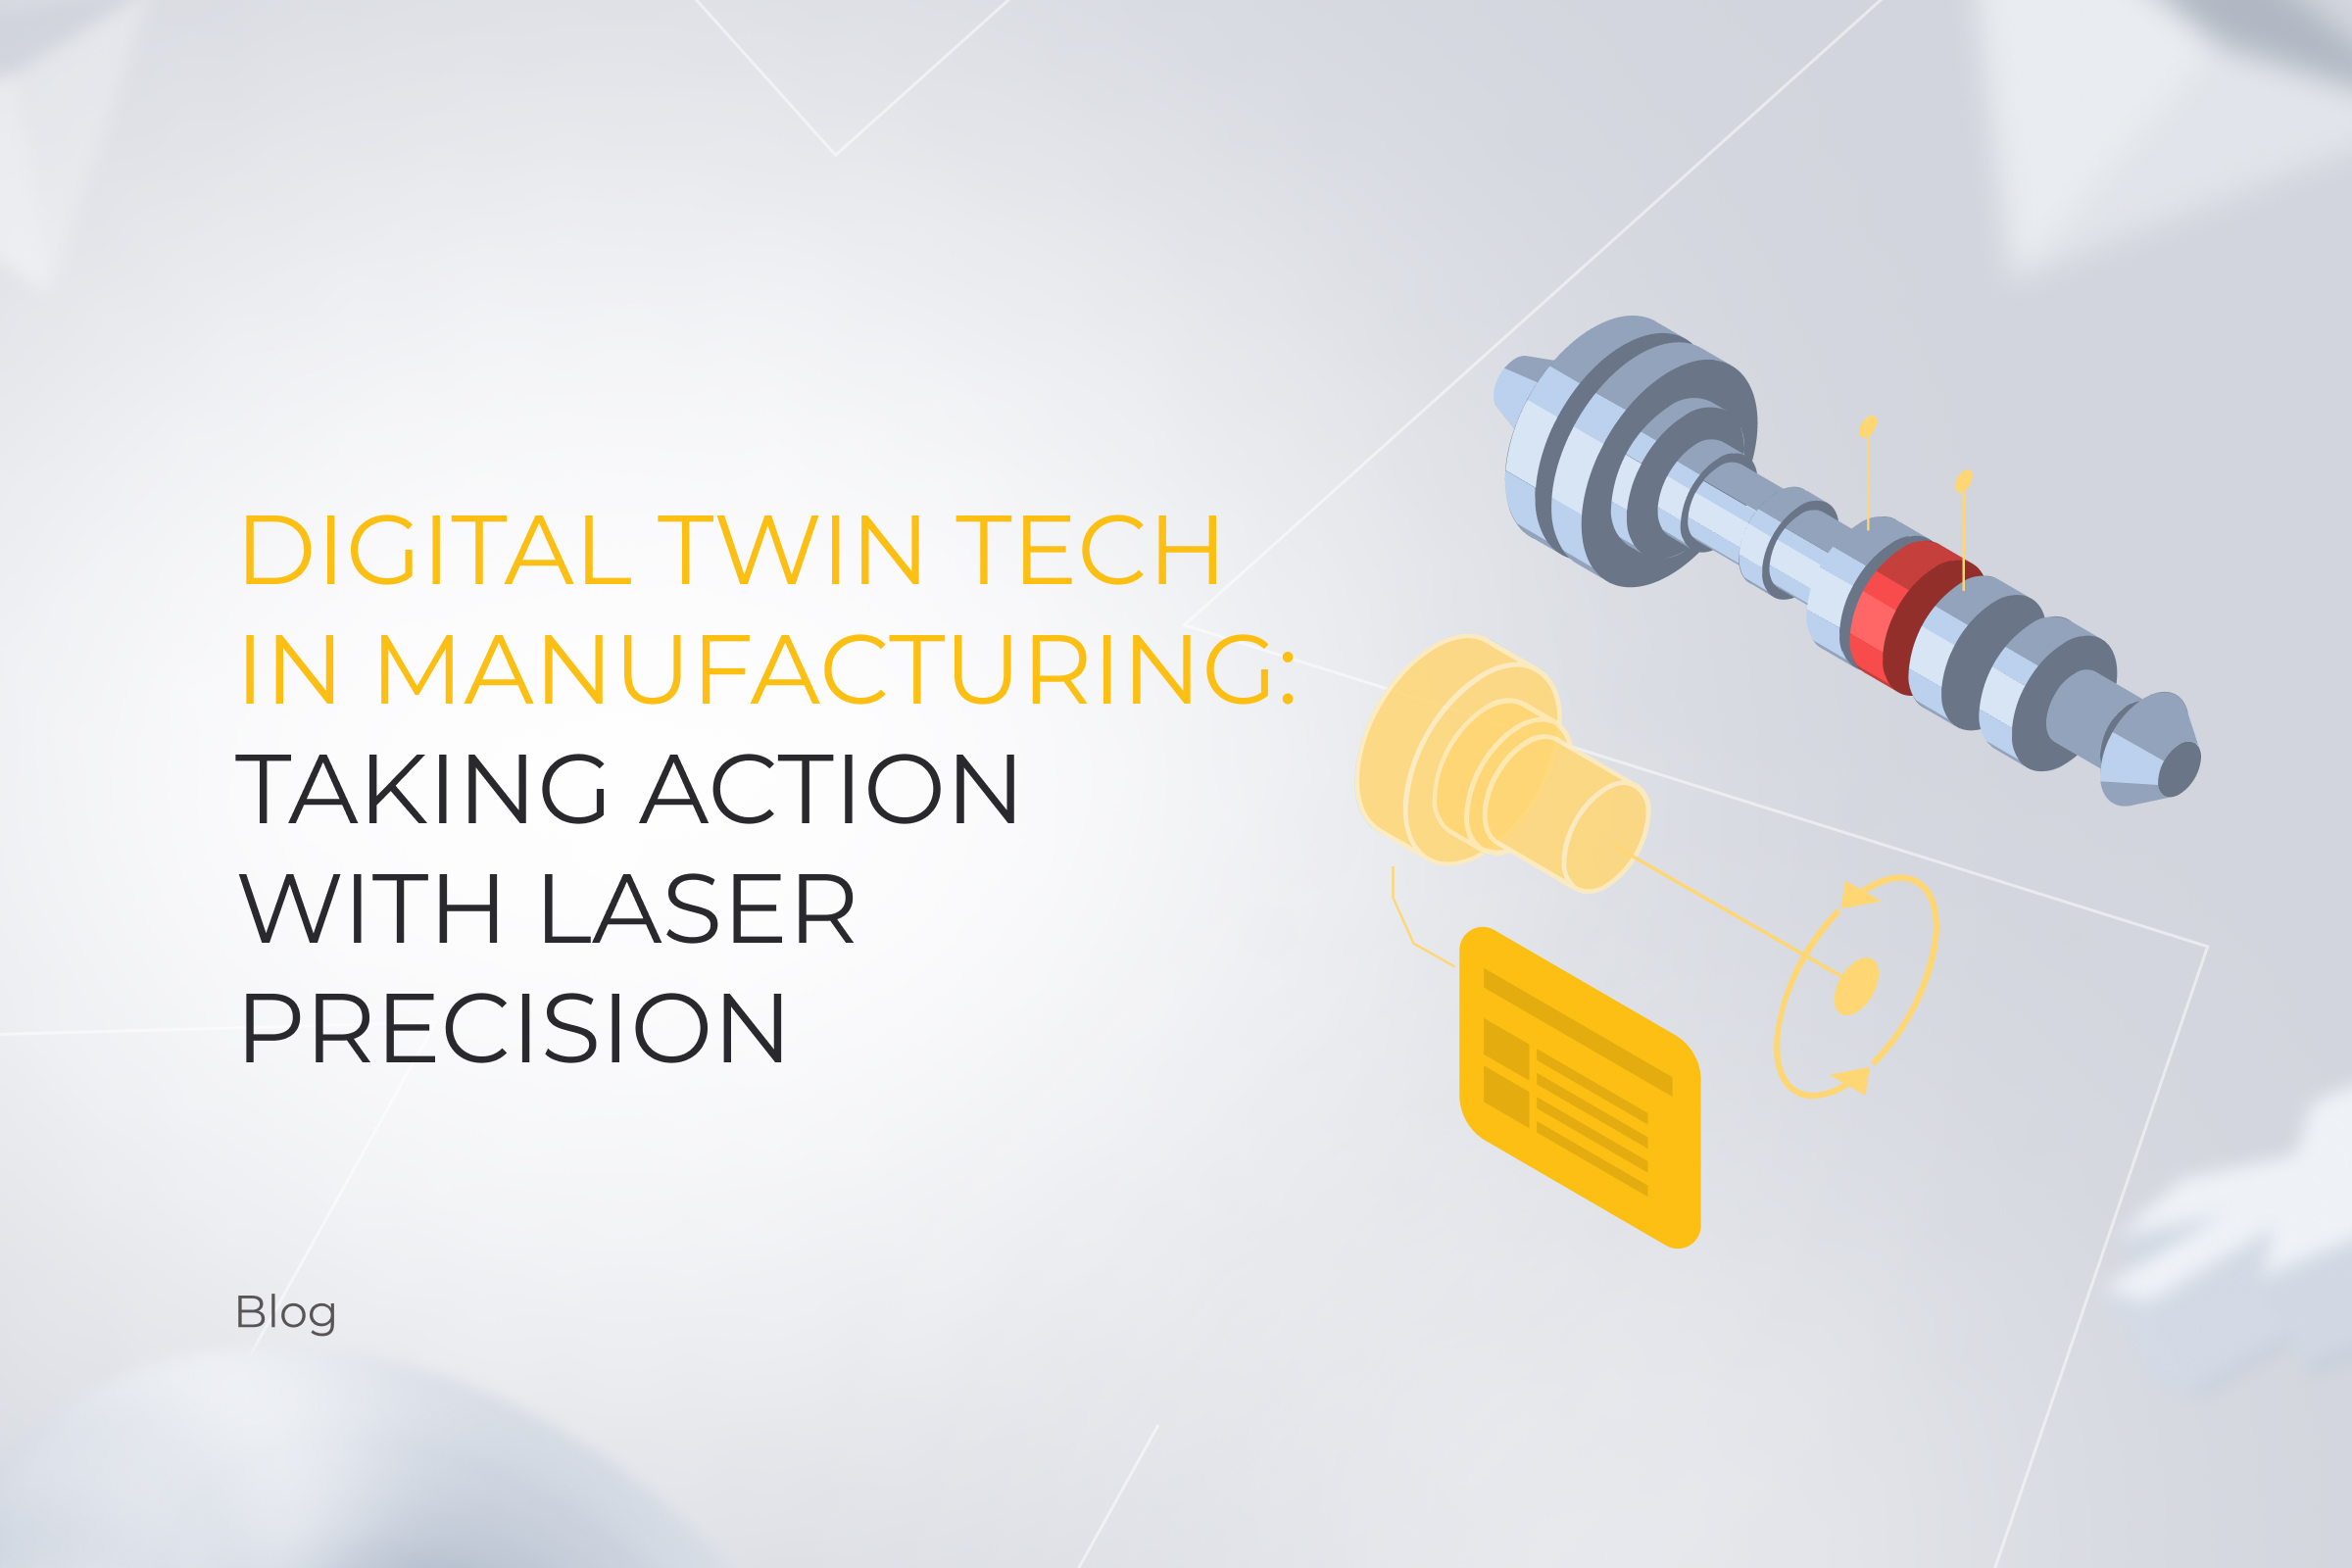 Digital Twin Tech in Manufacturing: Taking Action with Laser Precision